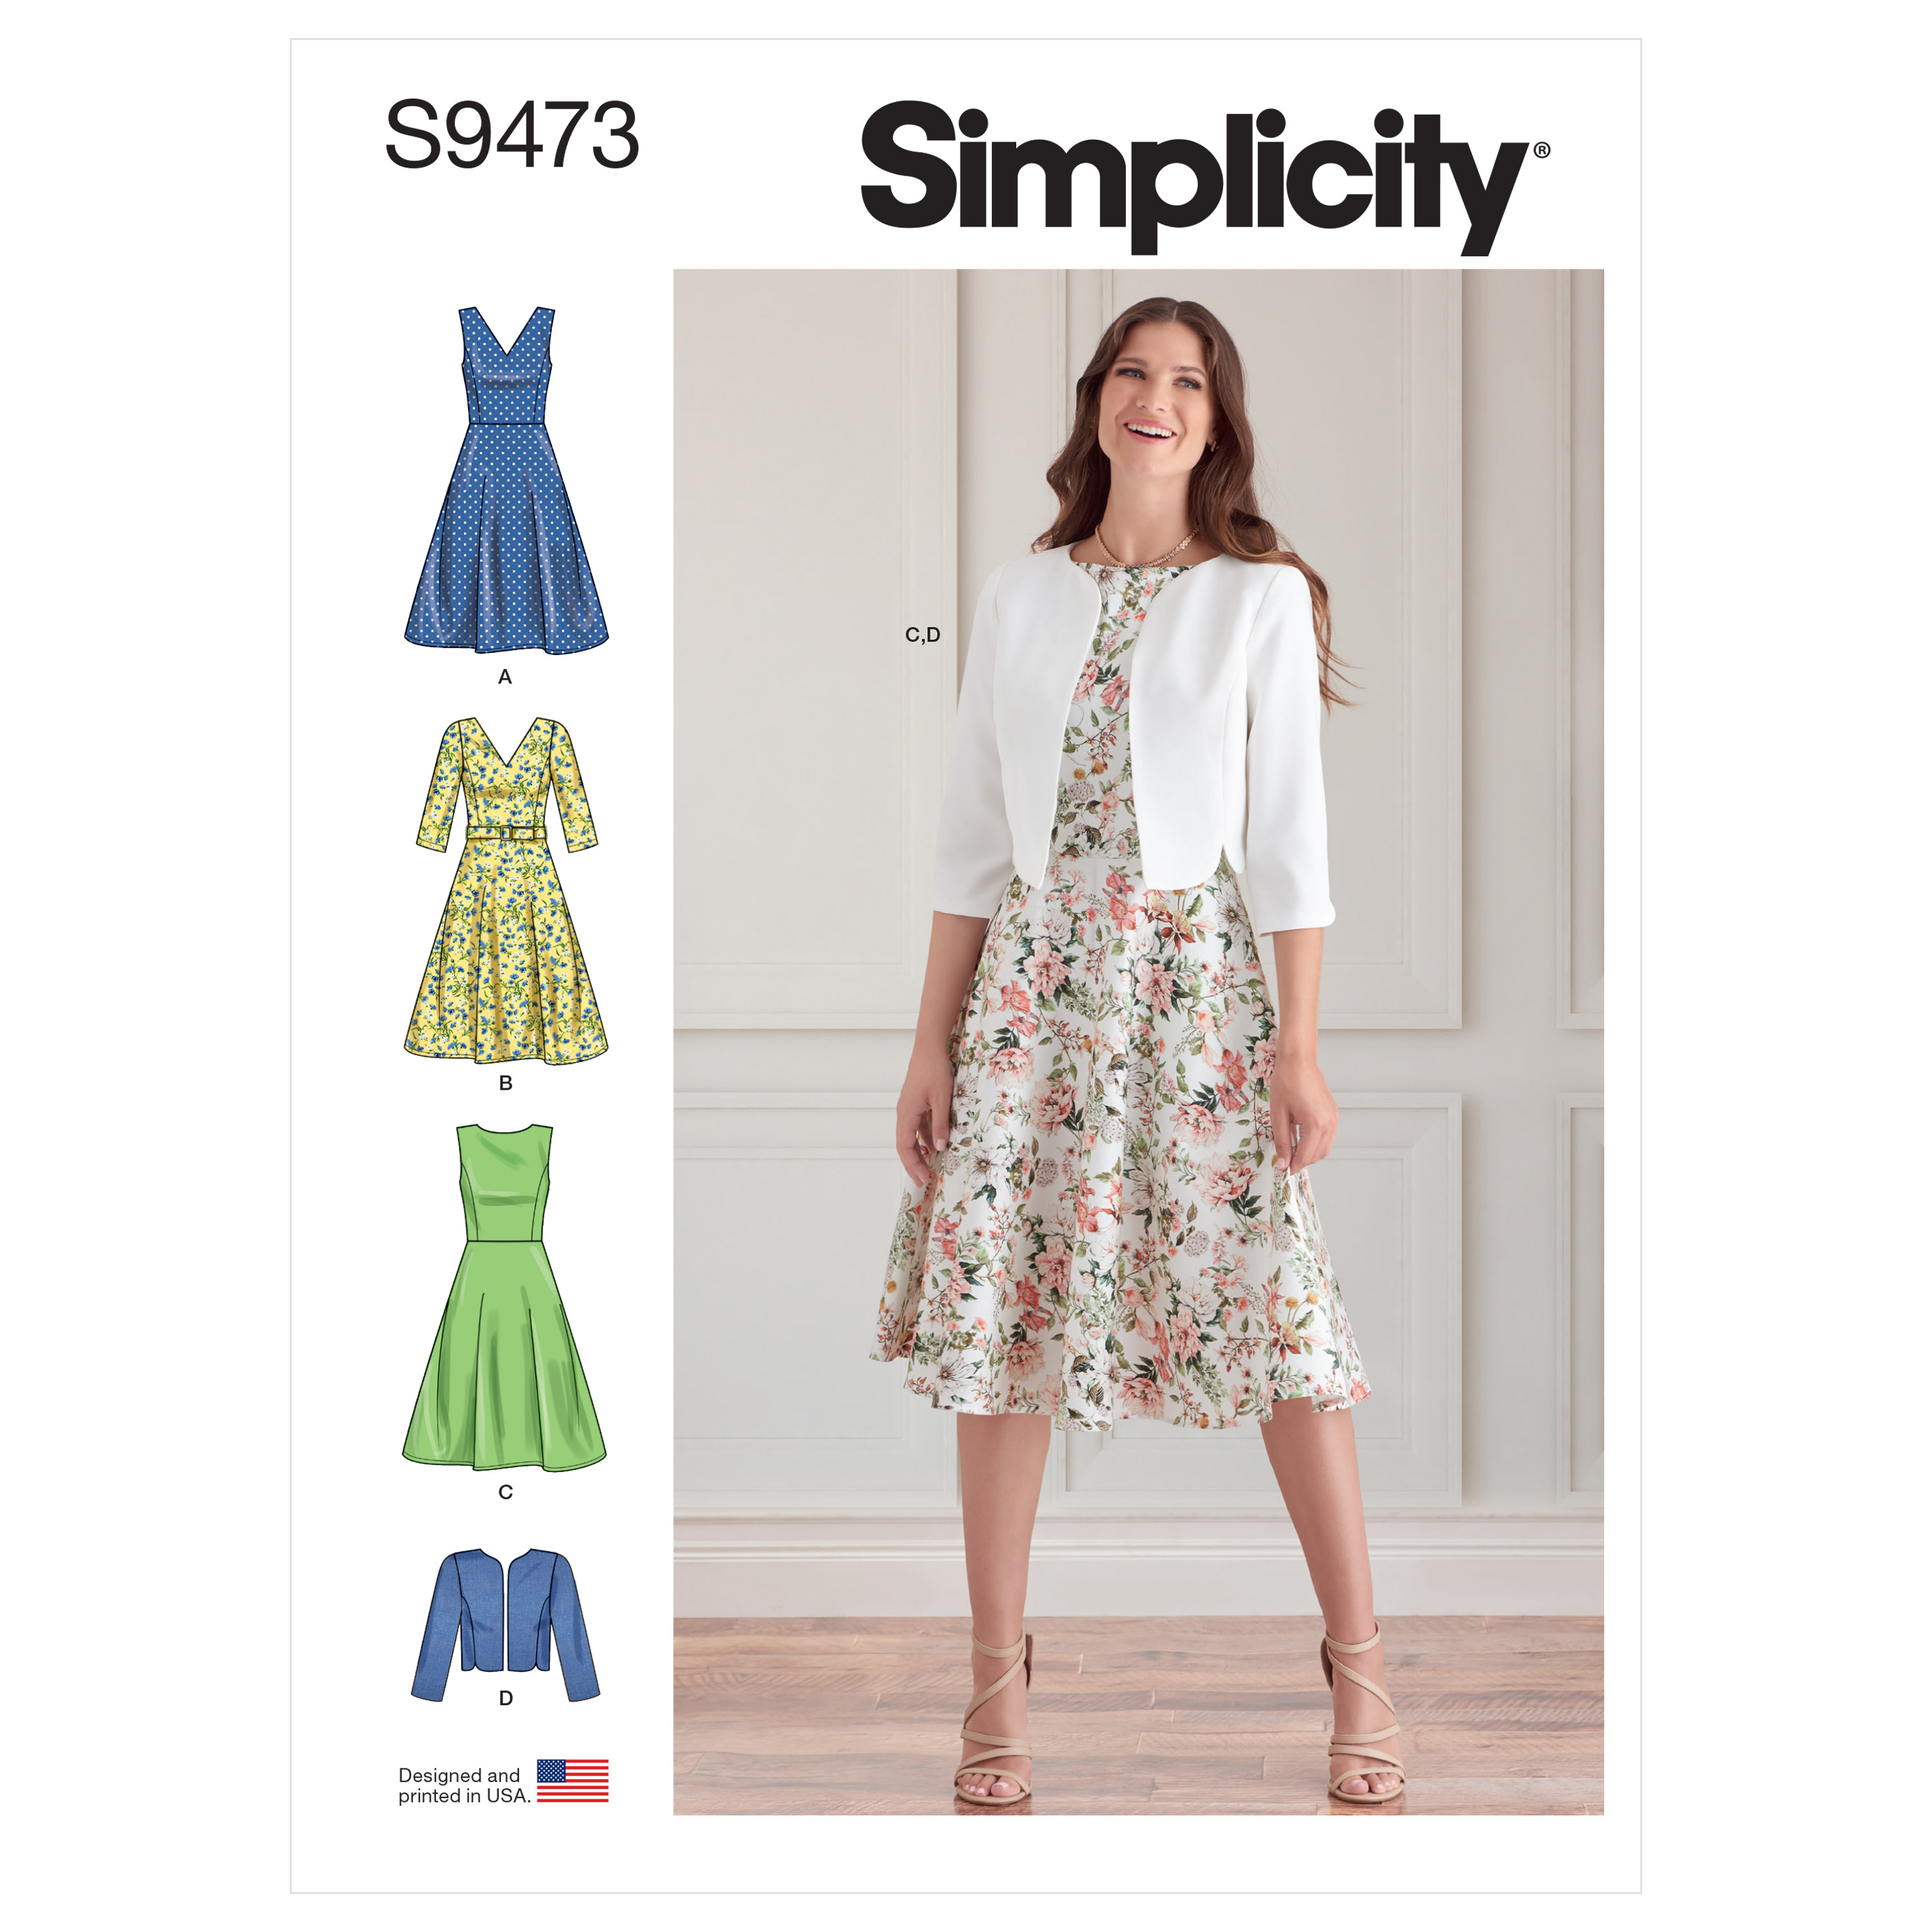 https://images.patternreview.com/sewing/patterns/simplicity/2022/9473/9473.jpg